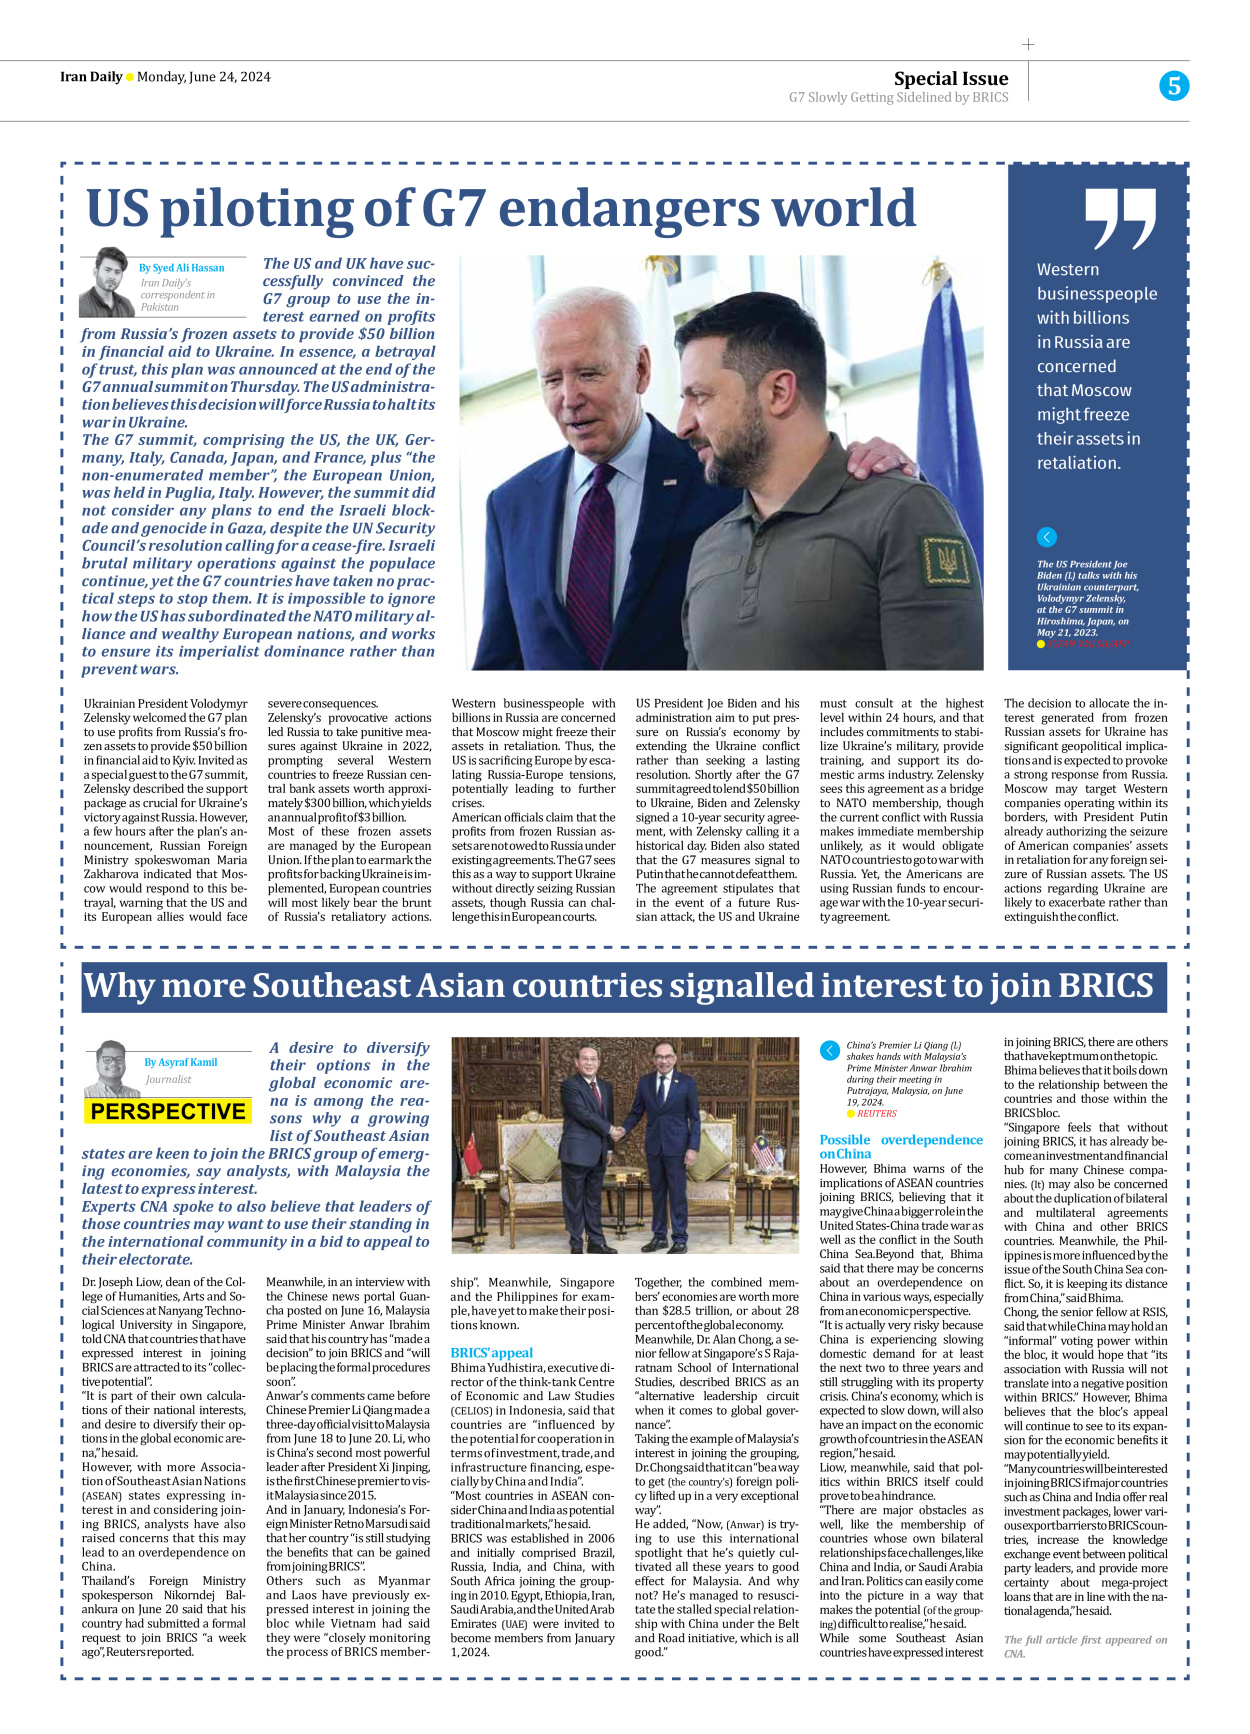 Iran Daily - Number Seven Thousand Five Hundred and Eighty Eight - 24 June 2024 - Page 5